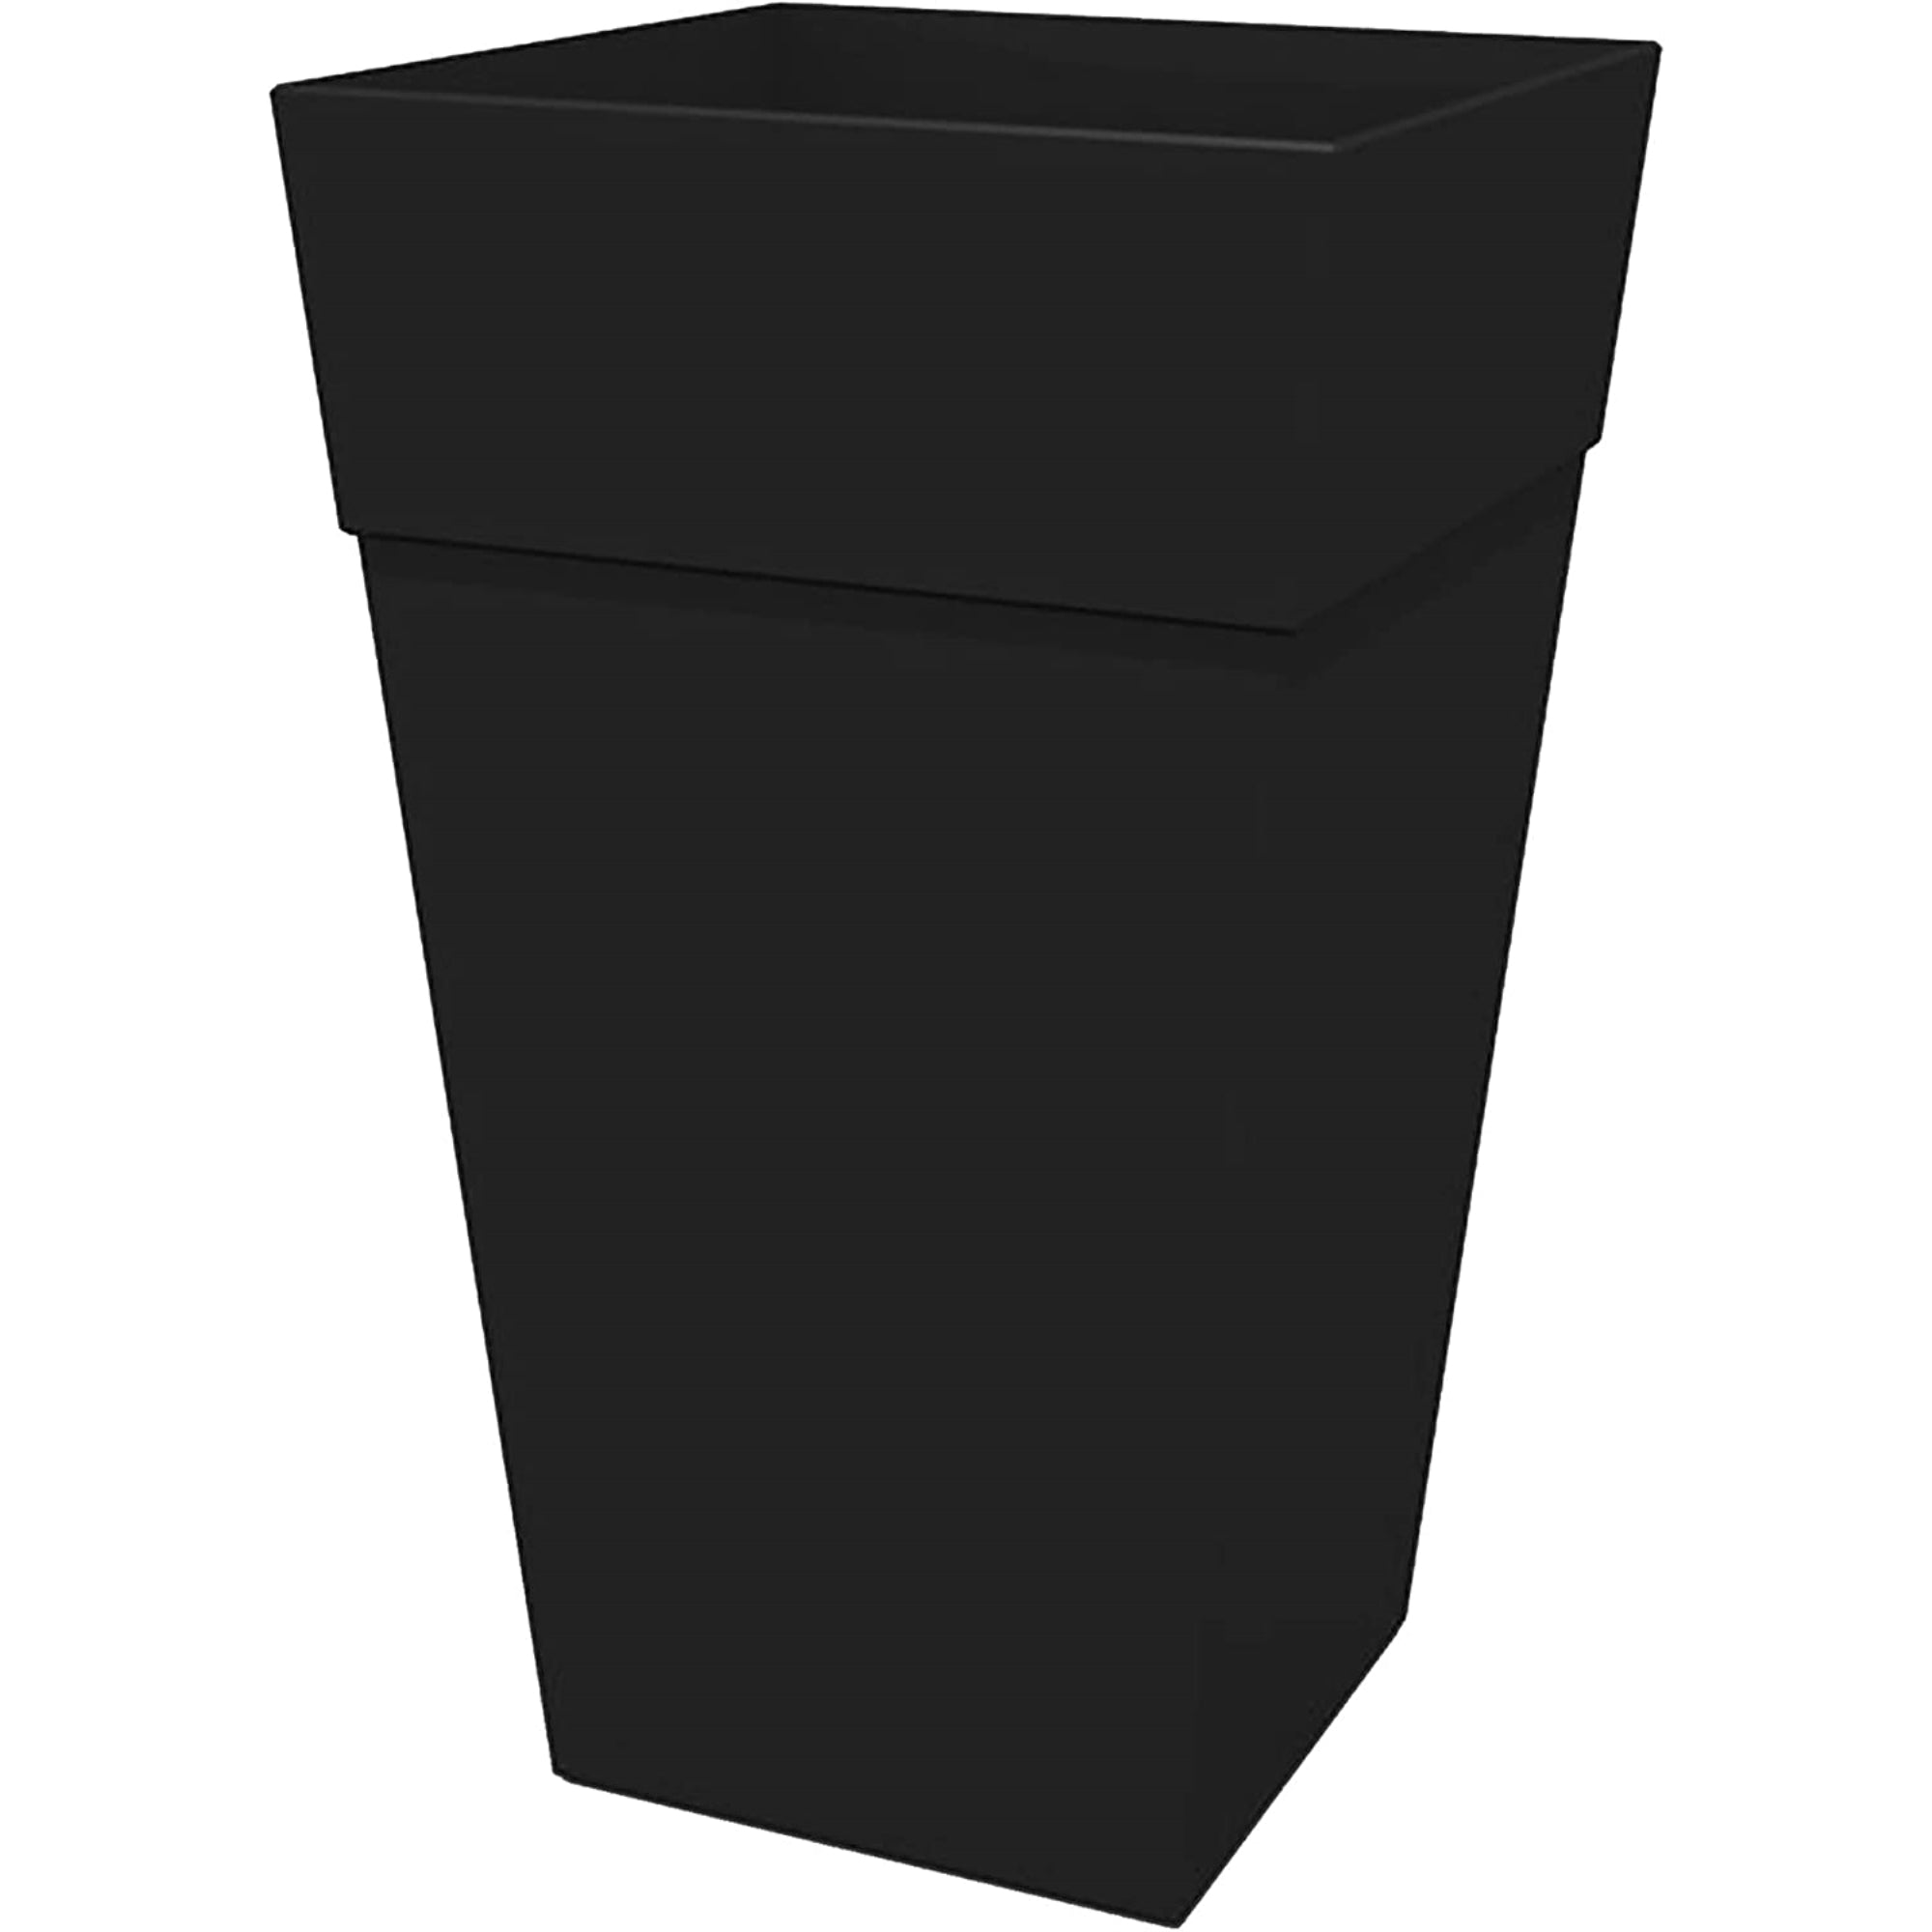 Bloem Finley Tall Indoor Outdoor Plastic Square Planter, 25 Inches